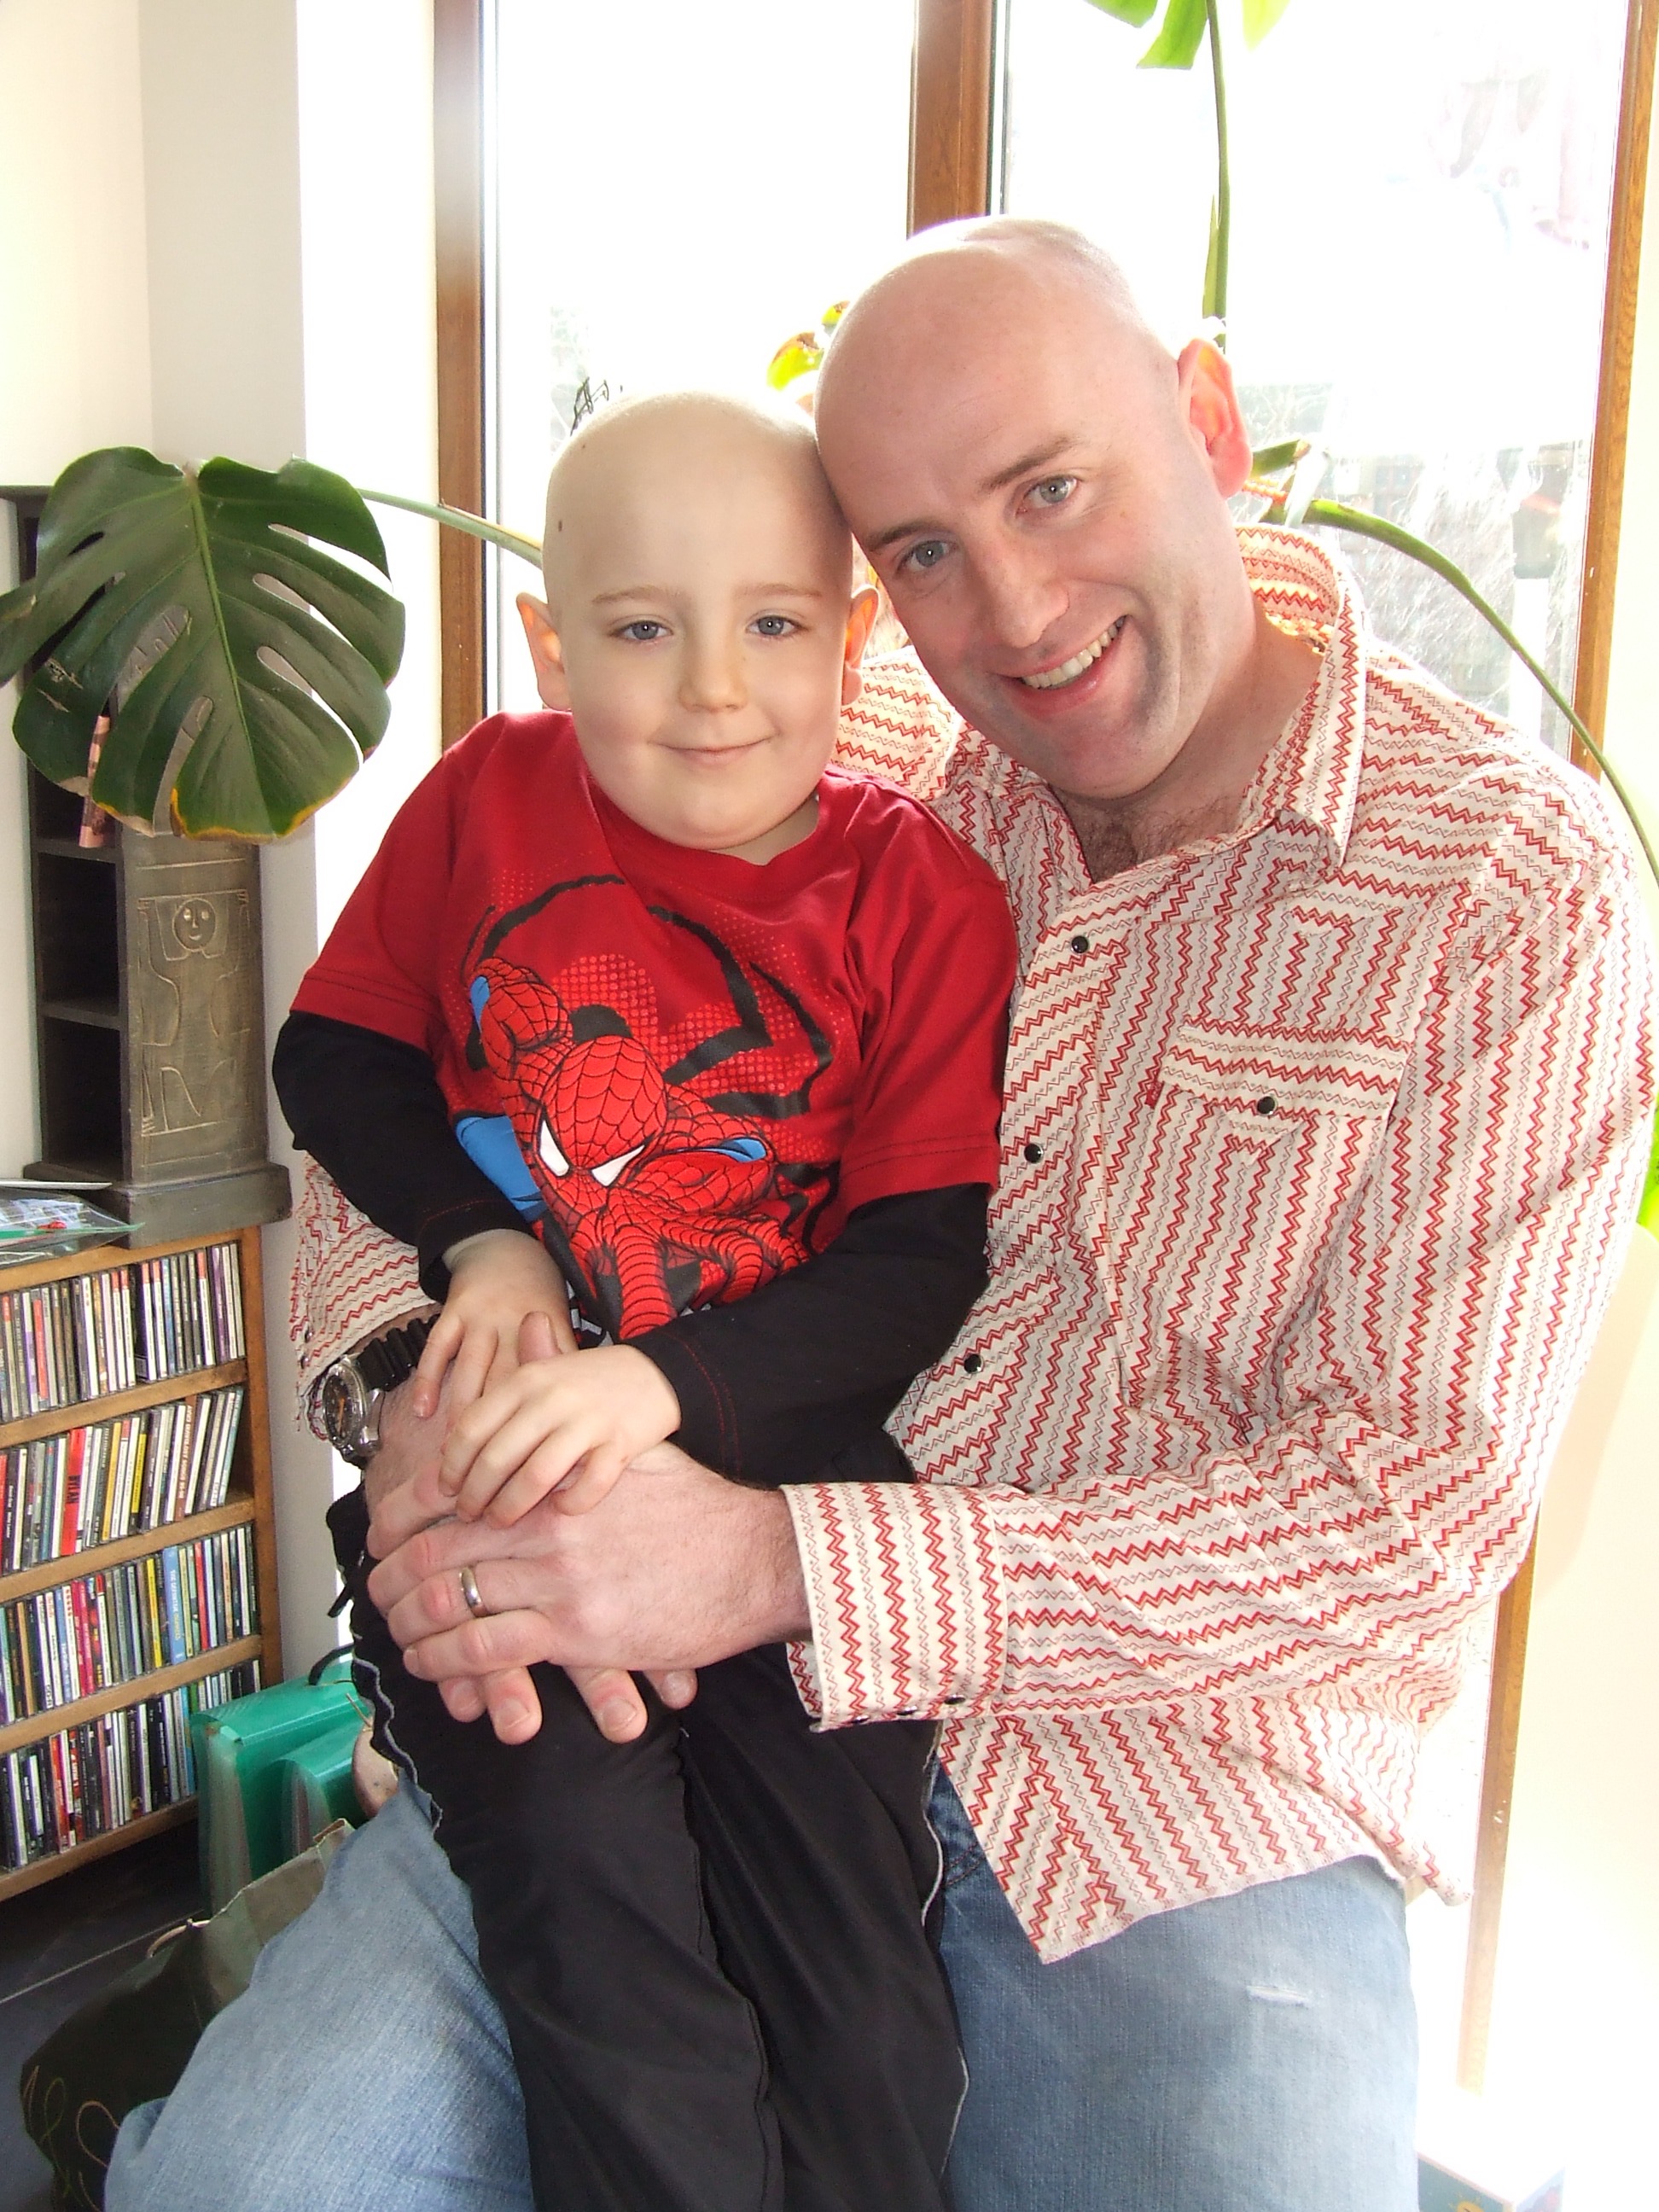 Vincent and Callan Donegan - Going through Treatment